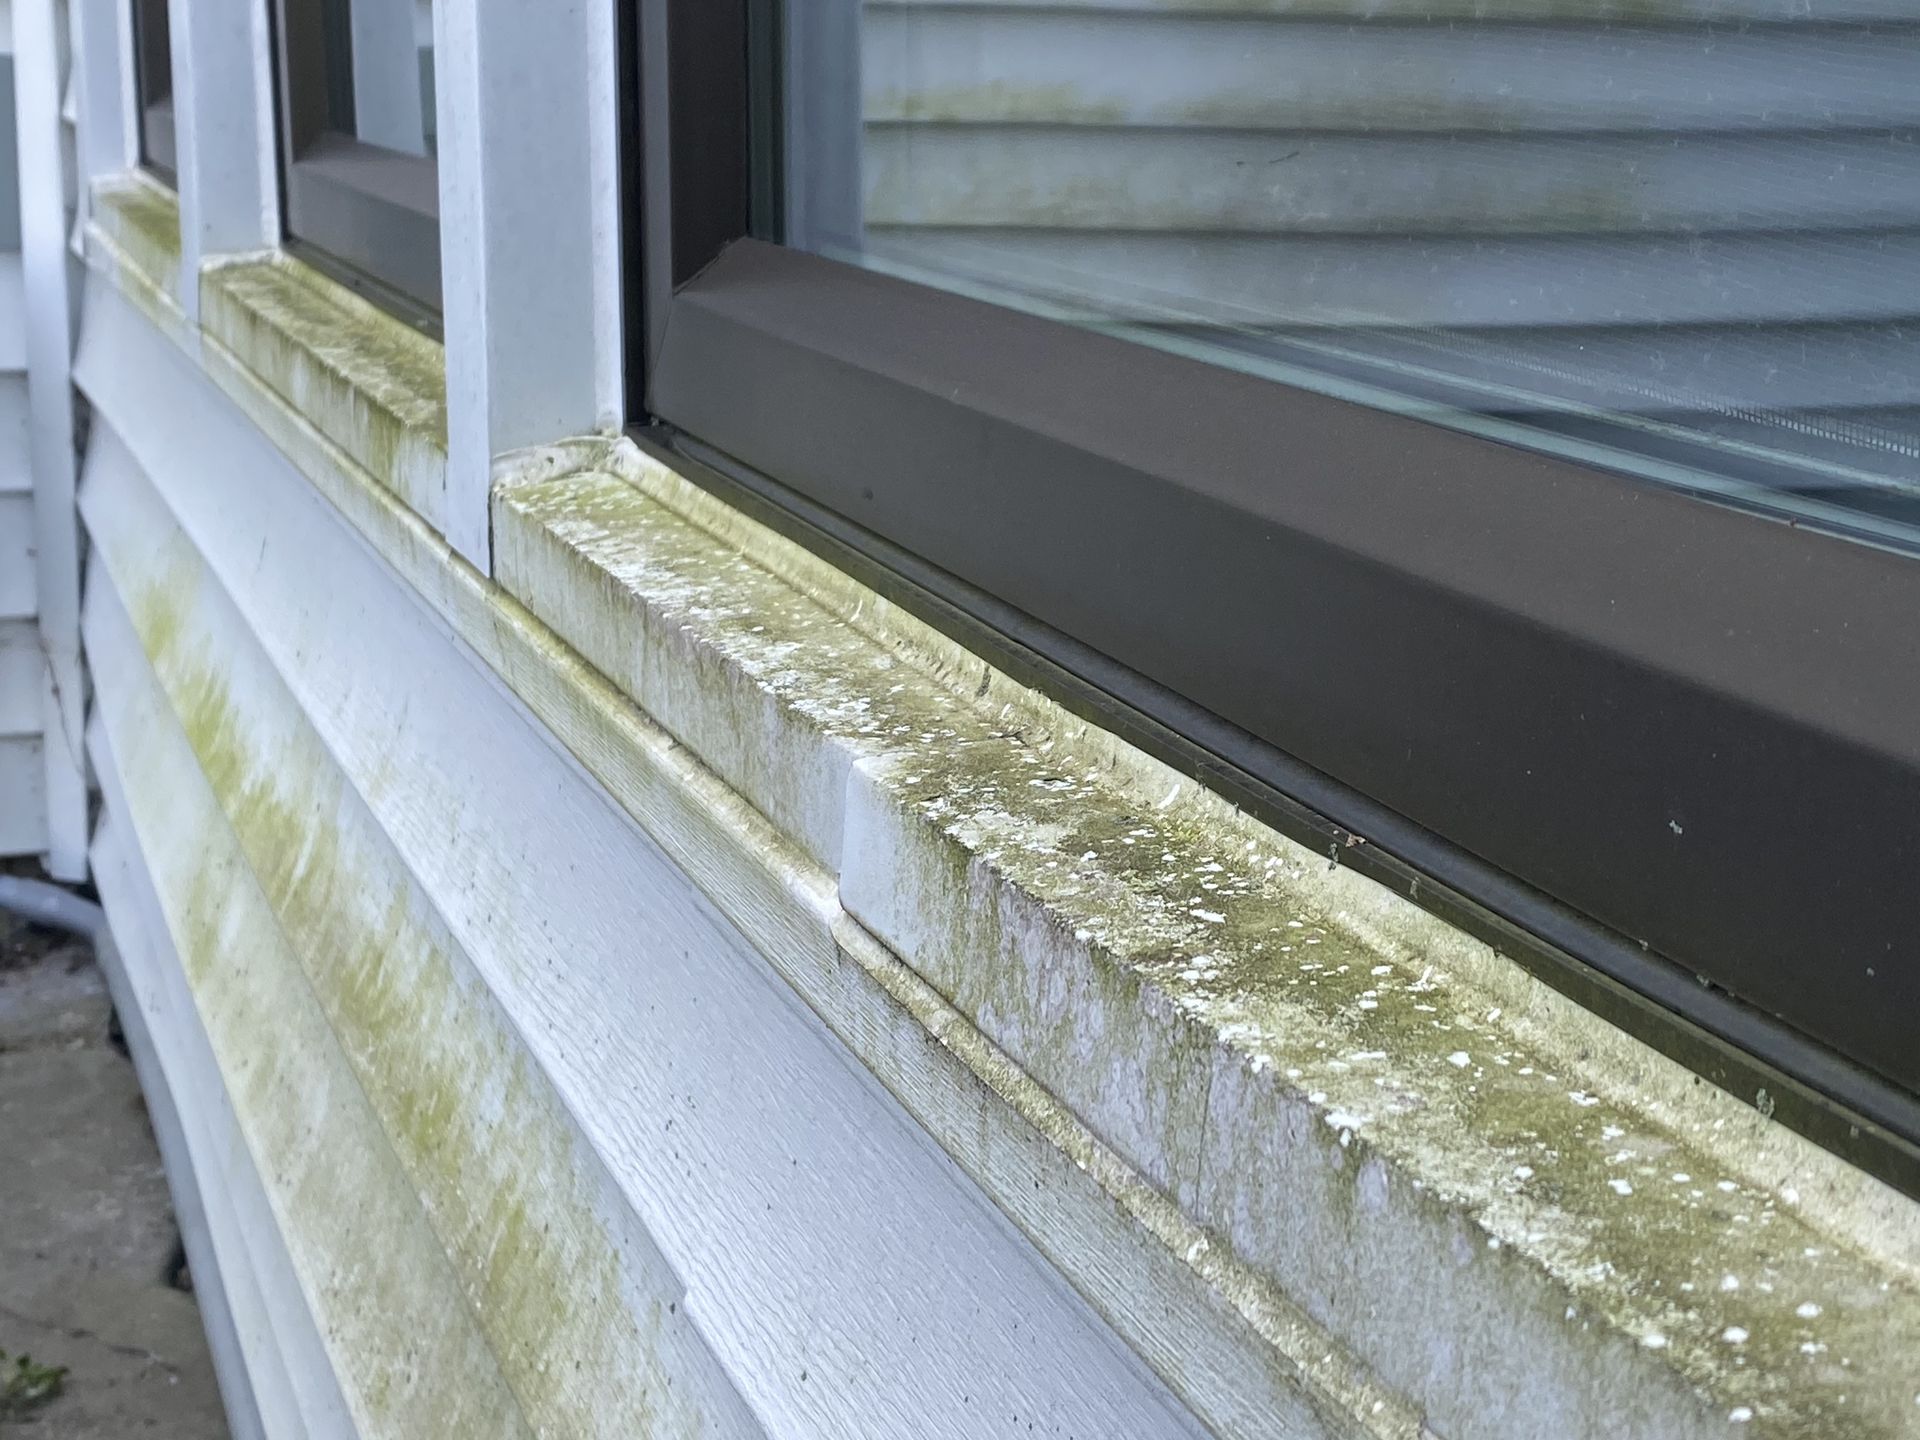 a close up of a window sill on a house with green algae growing on it .